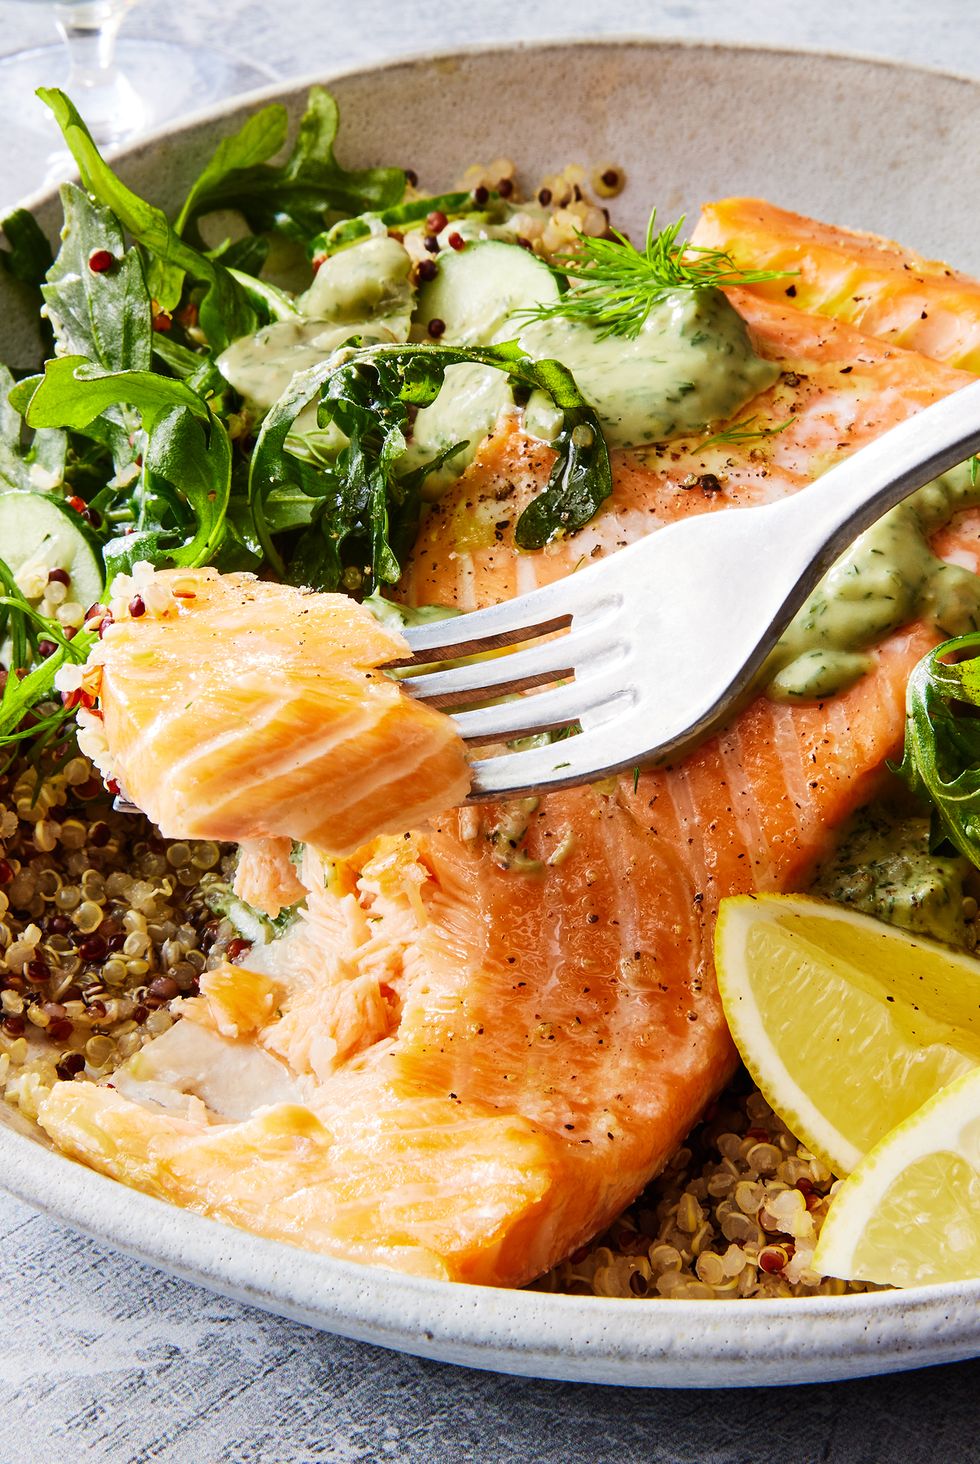 quinoa in a bowl with salmon, arugula, cucumber, lemon wedges, and a green sauce